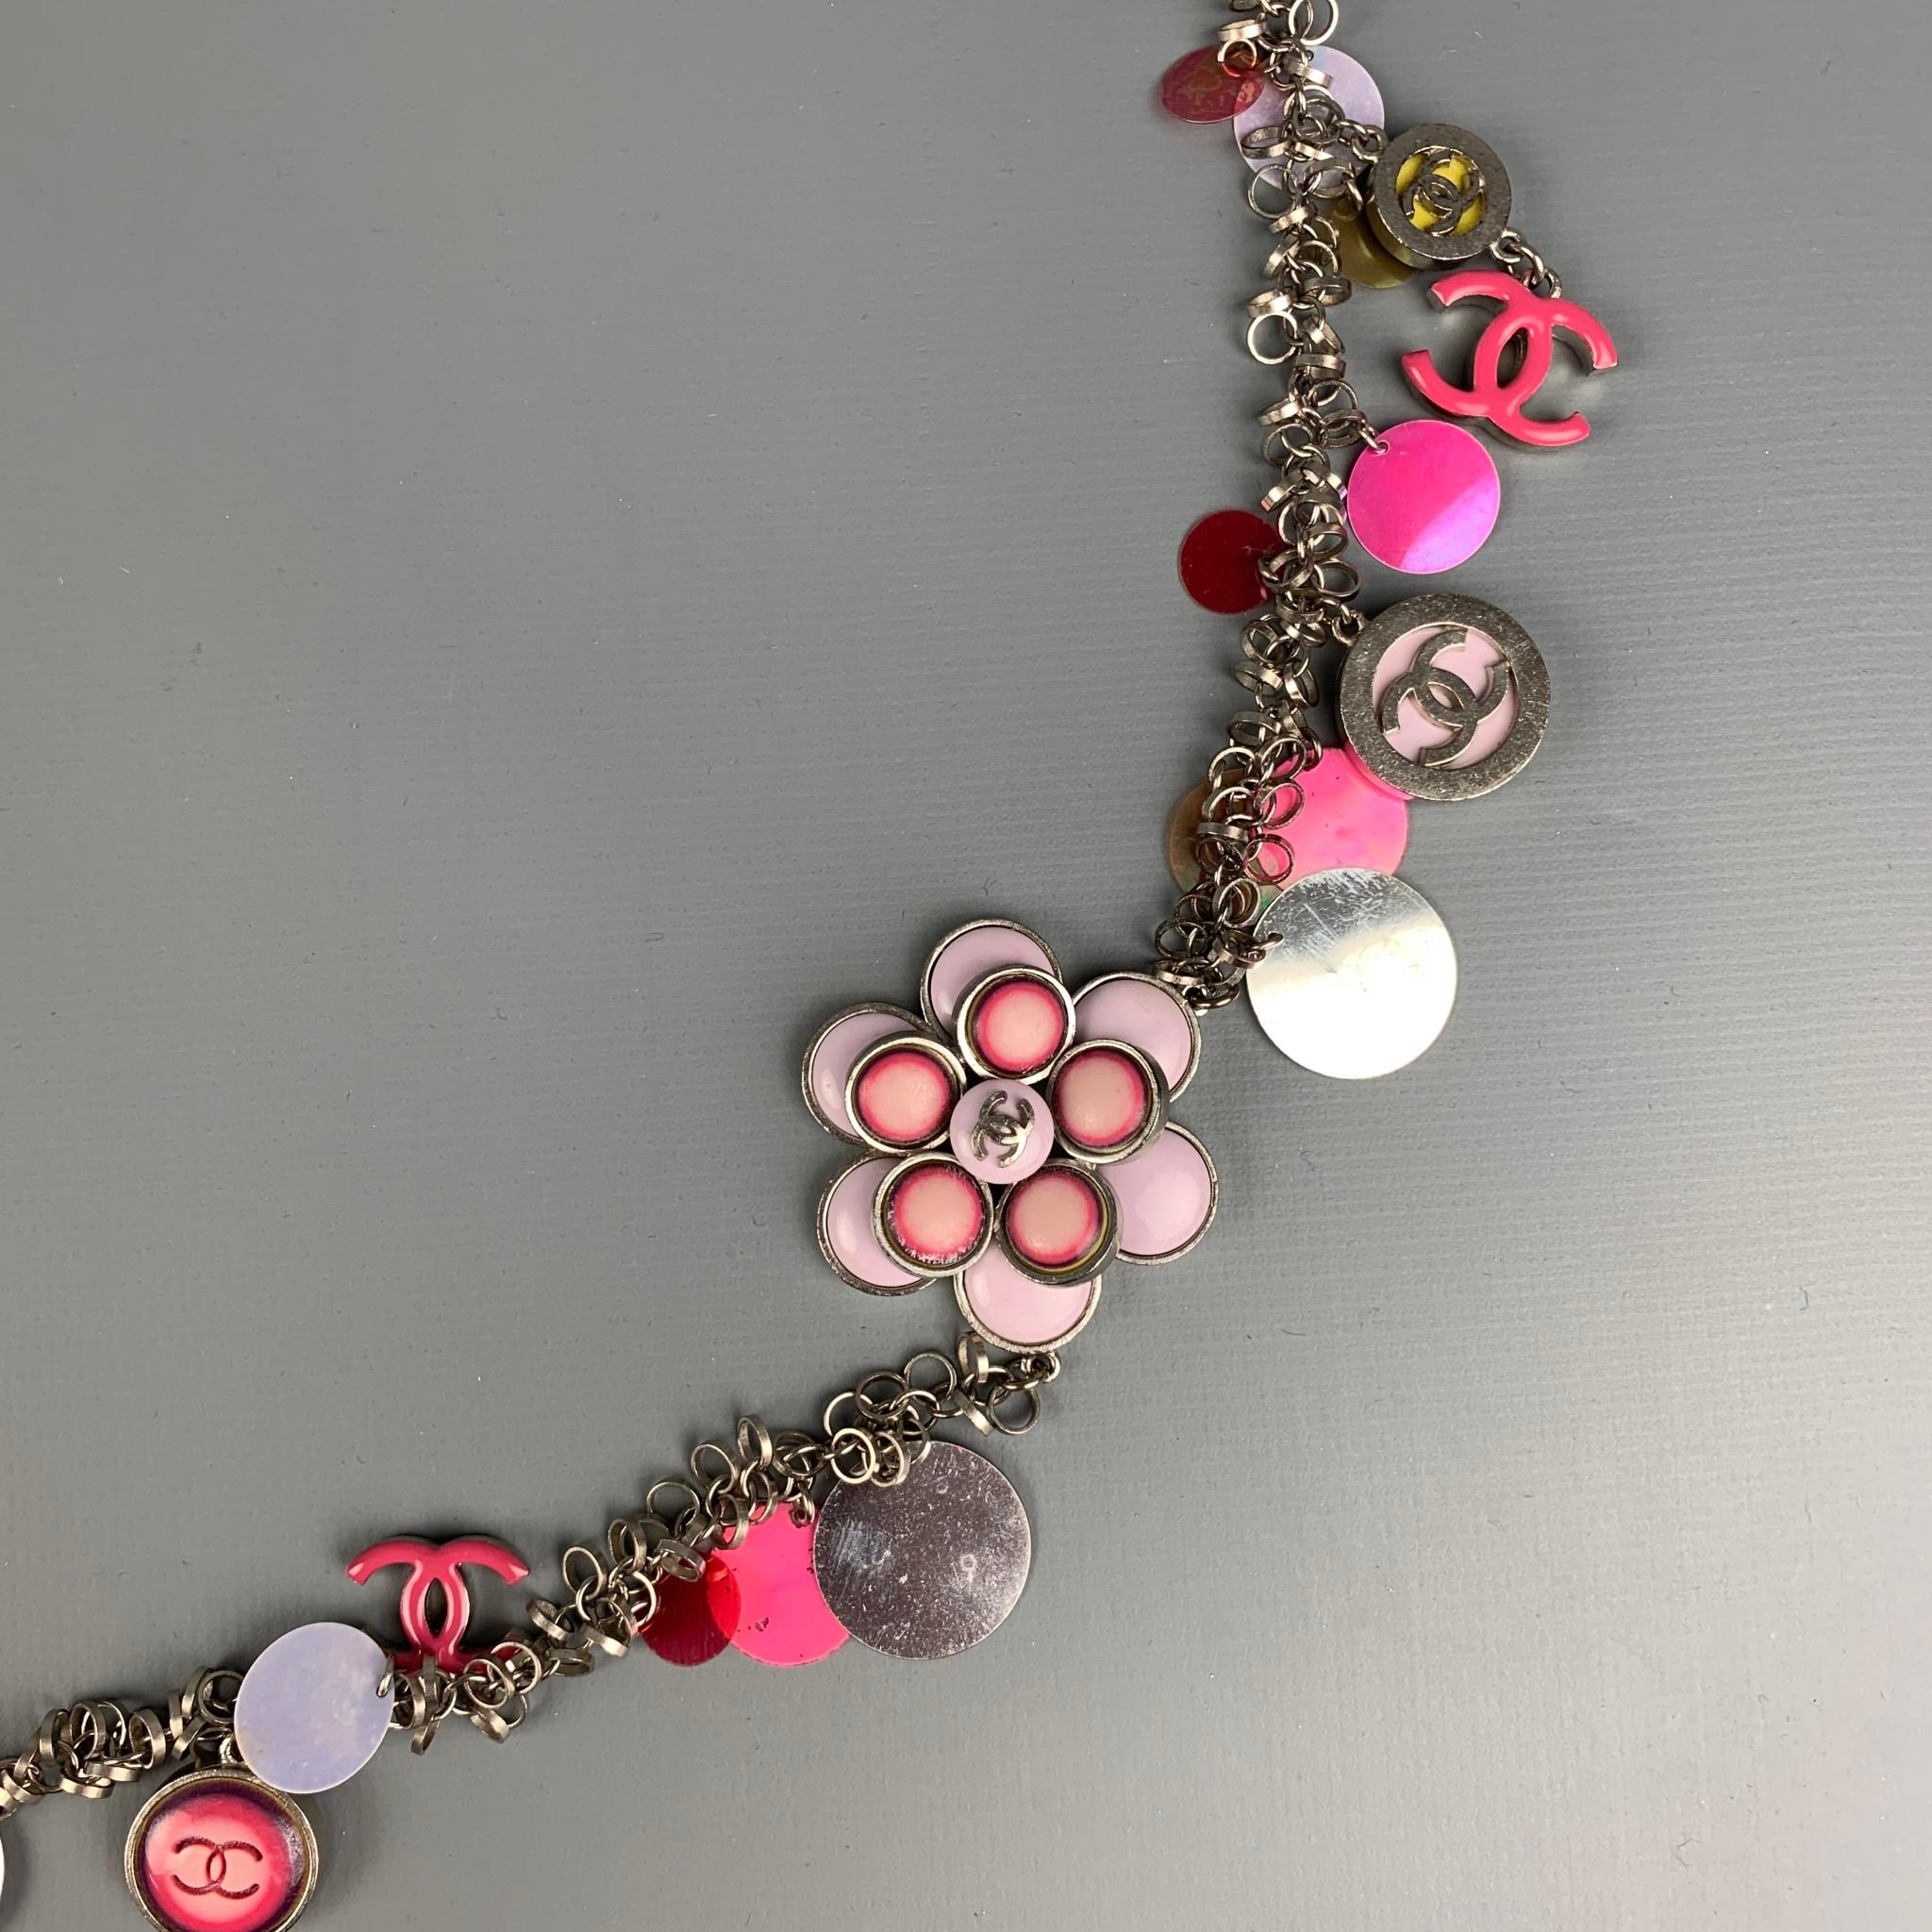 CHANEL S/S 2004 necklace comes in a silver tone metal base featuring a multi-color circular plastic medallion discs, CC charms, one large camellia flower detail, and a clasp closure. 

Very Good Good Pre-Owned Condition.

Marked: